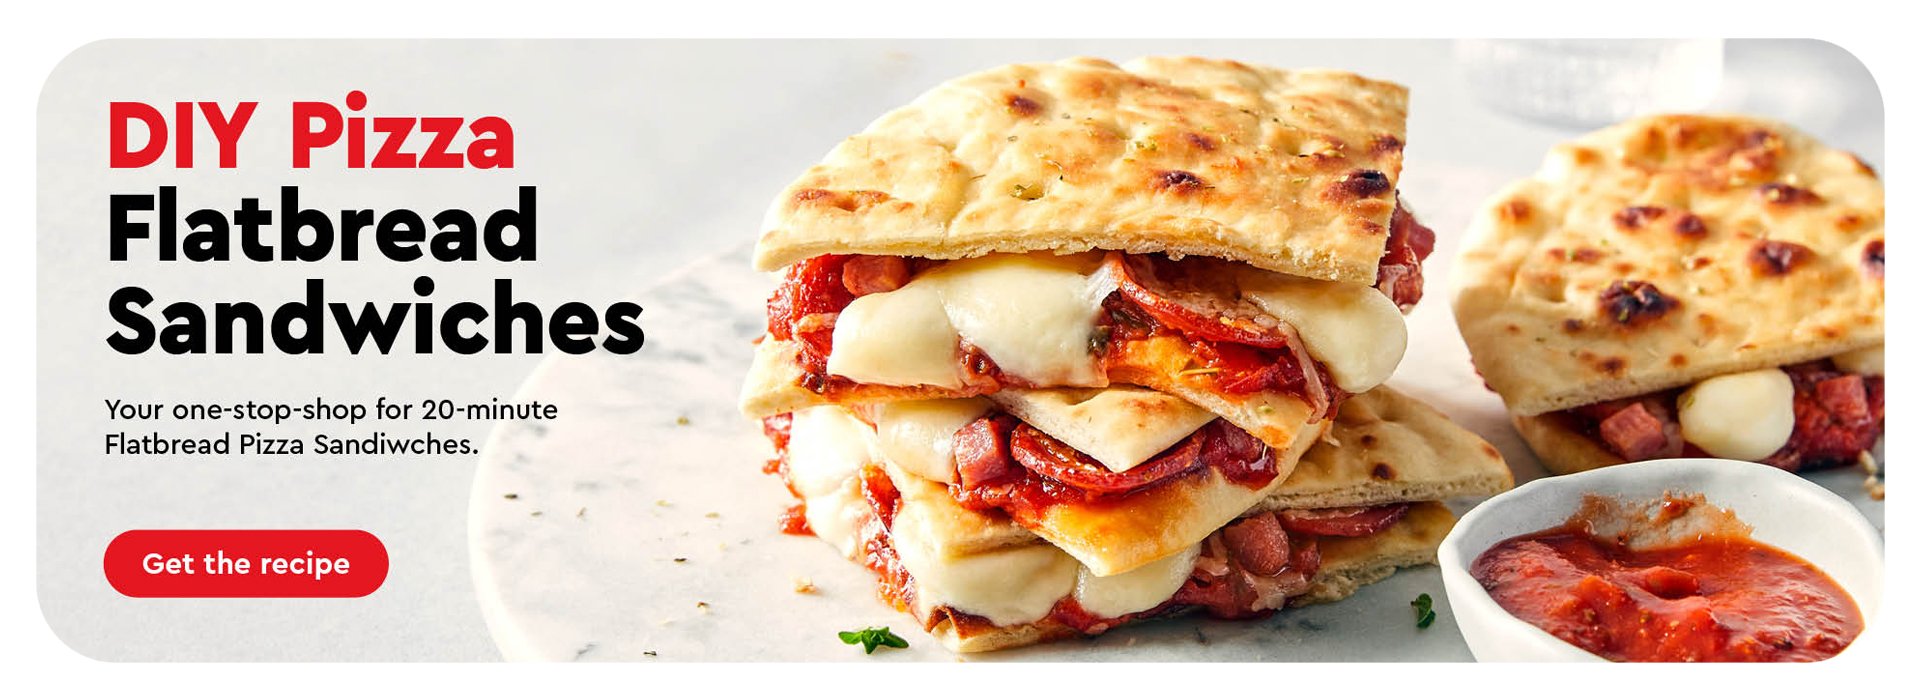 Text Reading 'DIY Flatbread Pizza sandwiches. Your one-stop-shop for twenty minutes Flatbread Pizza sandwiches. Discover the recipe from the 'Get the Recipe' button below.' Along with a picture of a delicious pizza sandwich.